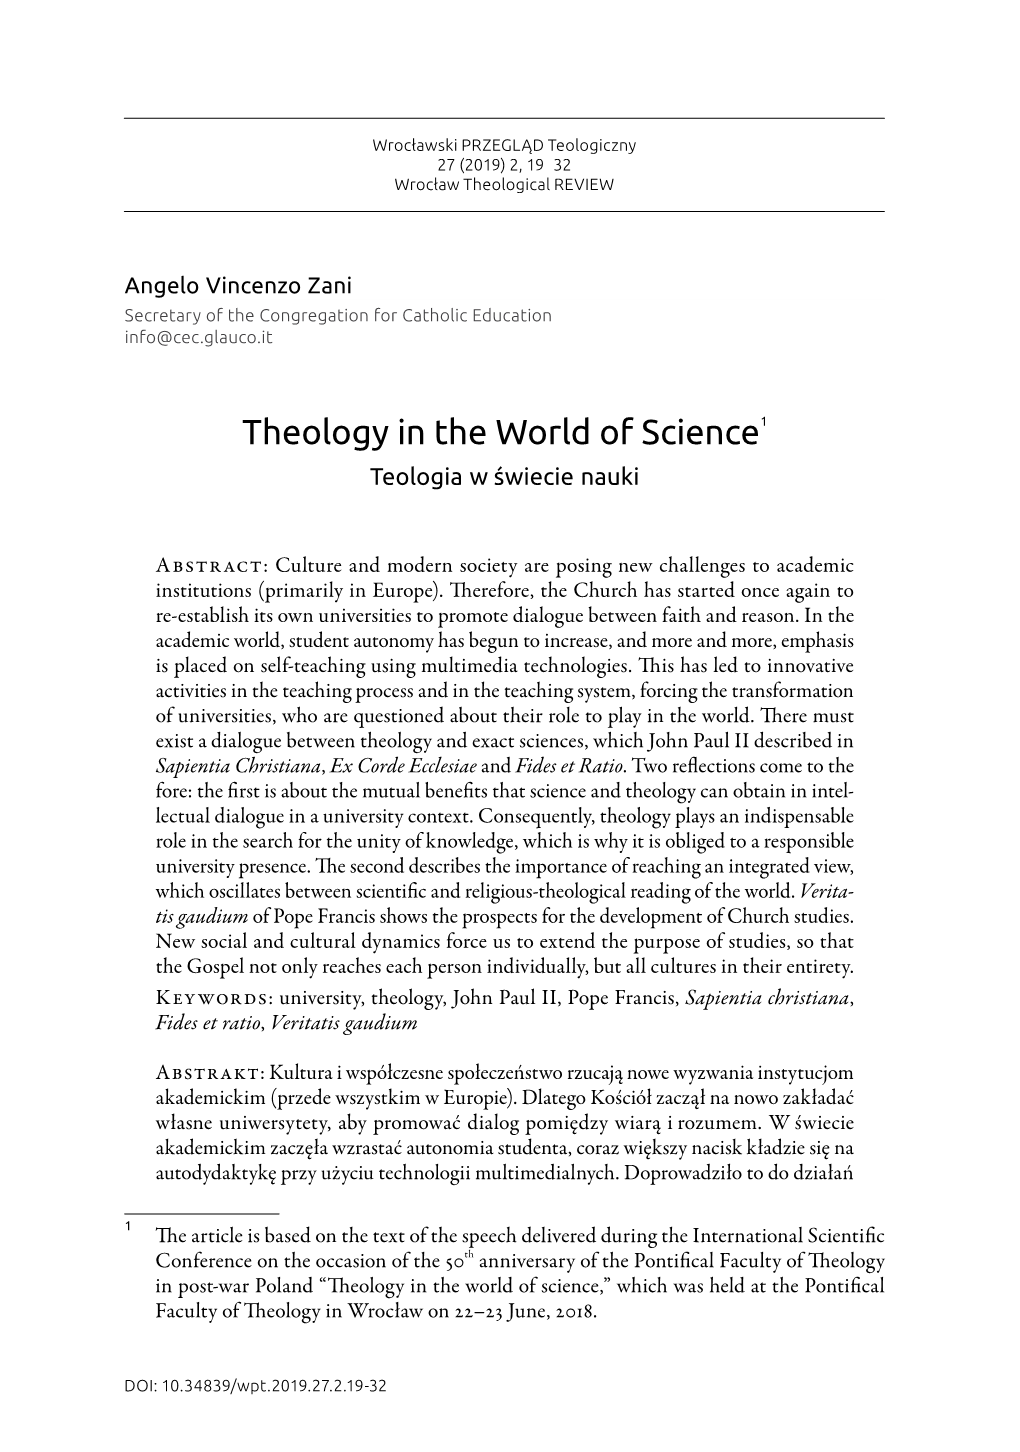 Theology in the World of Science1